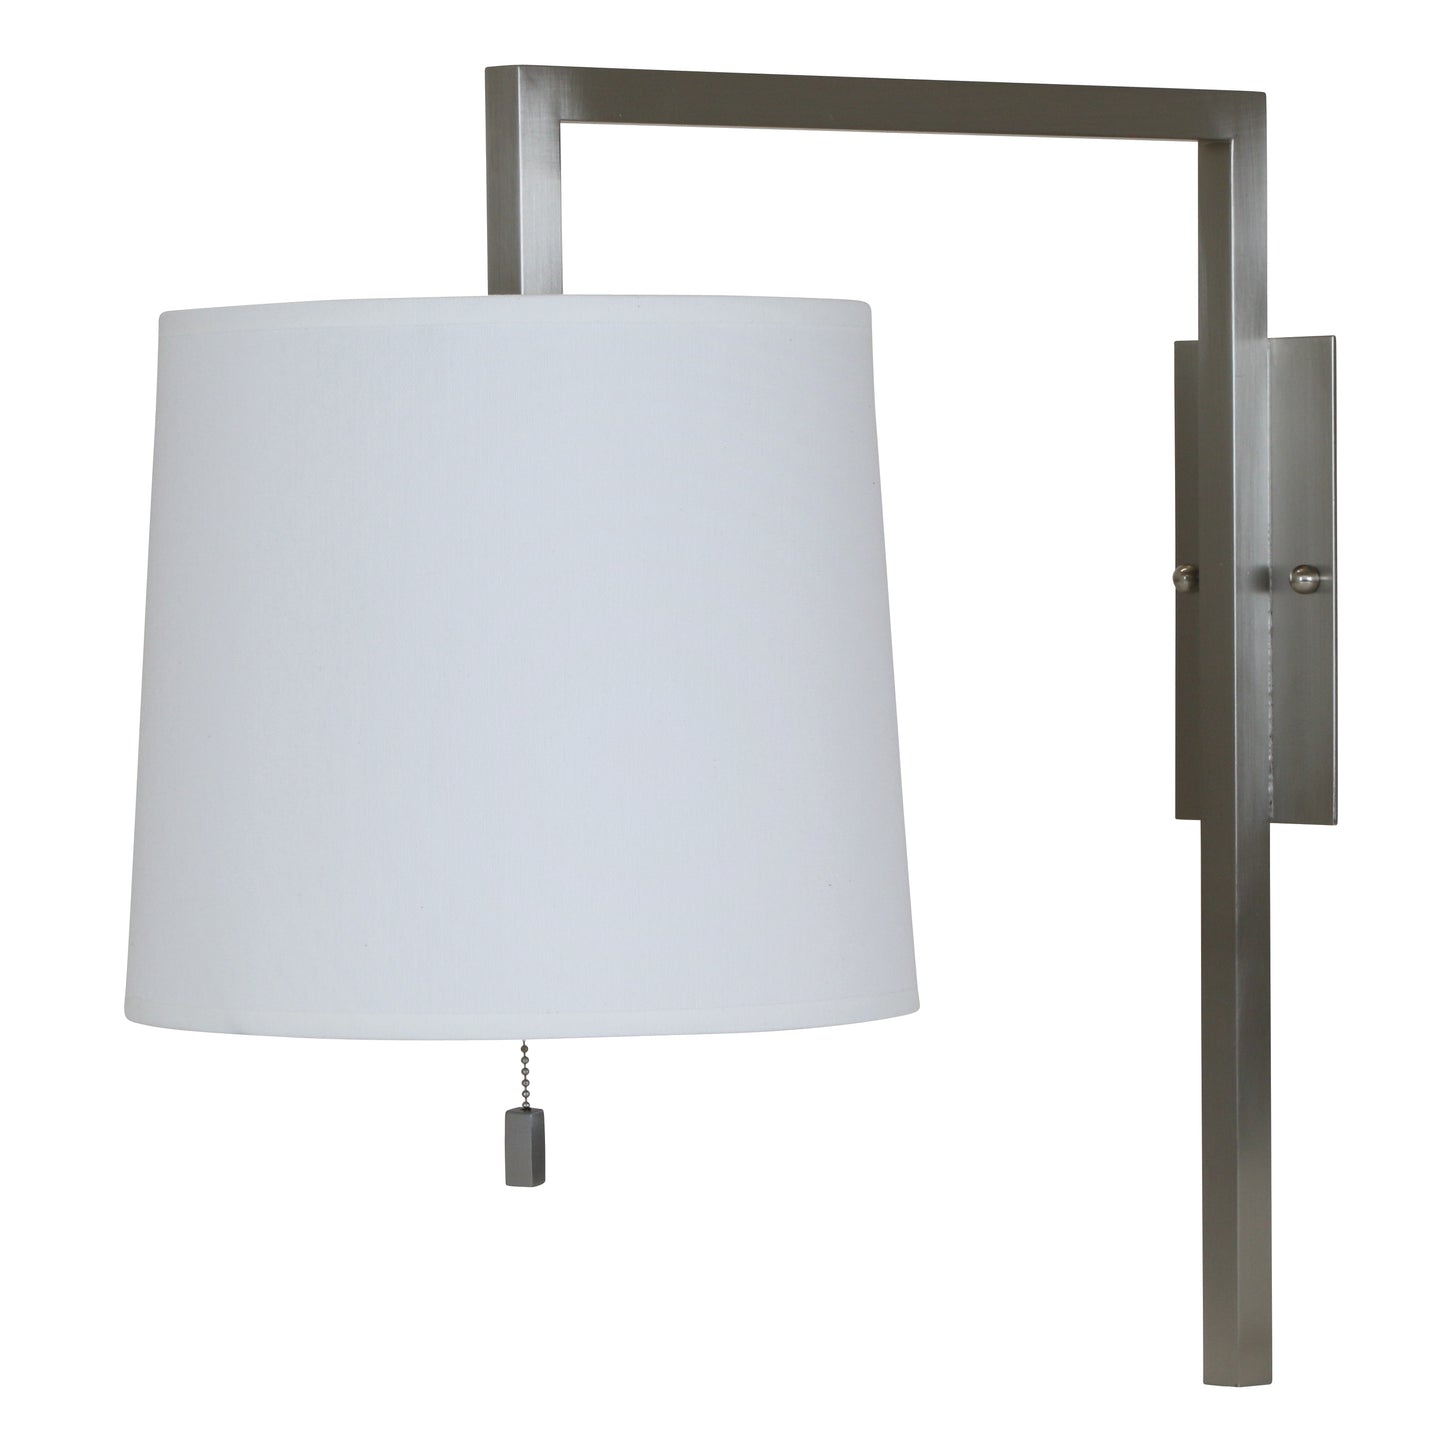 House of Troy Pin up wall lamp in satin nickel WL630-SN